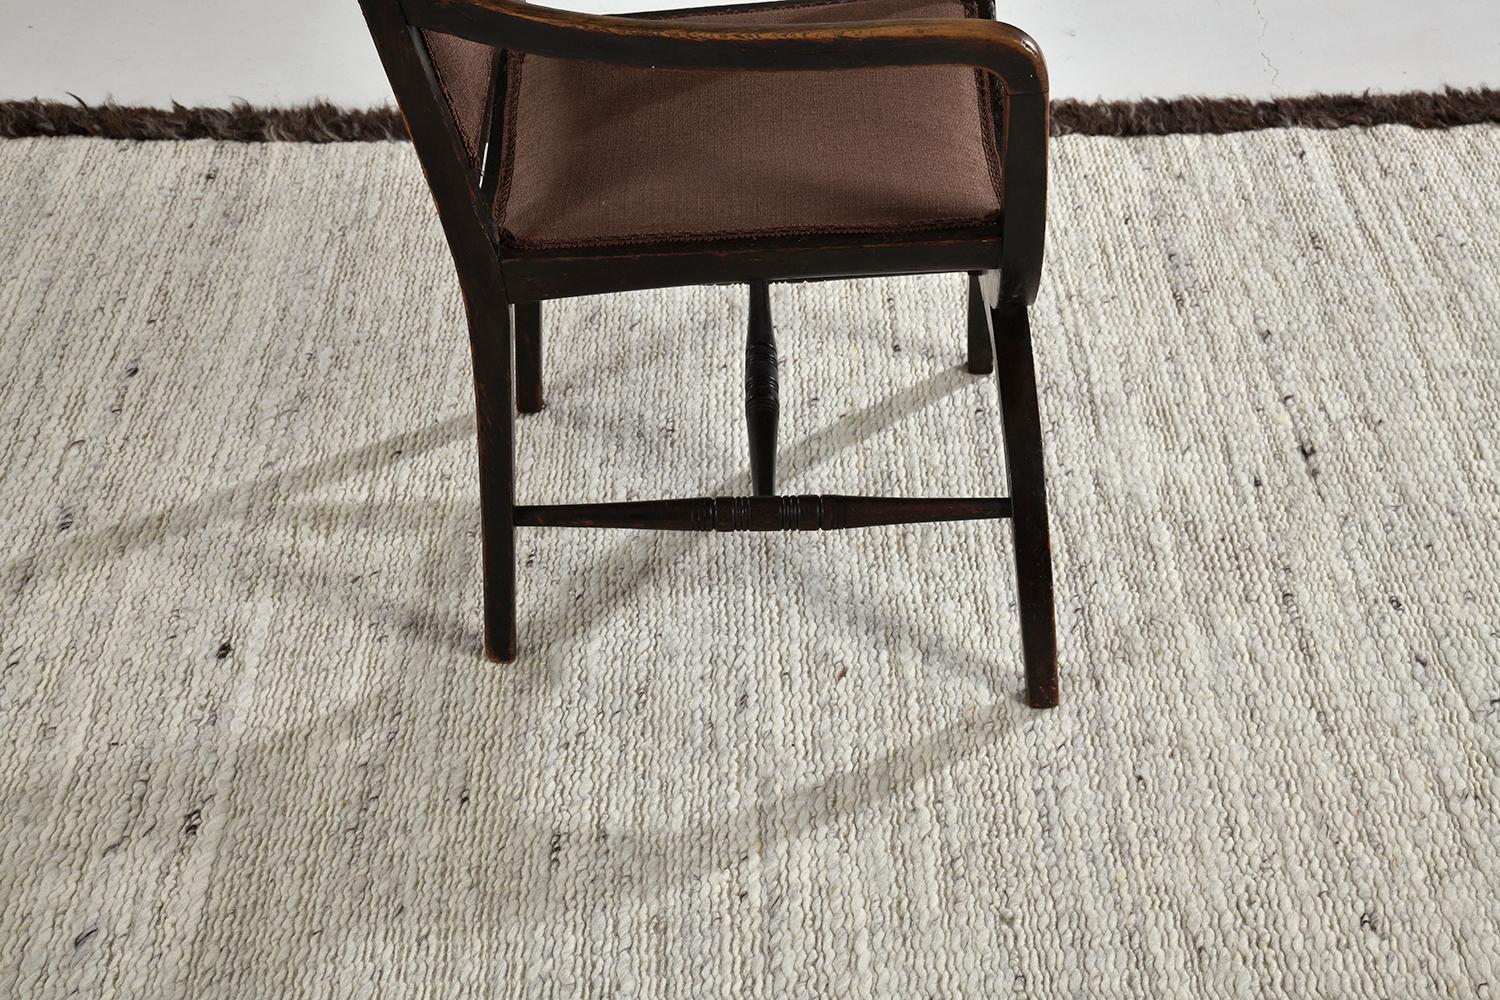 'Caleta' is a beautiful handwoven speckled ivory flat weave, bordered with rich brown shag. A simple yet interesting design, 'Caleta' is a luxurious and timely design that will elevate any space. Mehraban's Sabbia collection is unique for its play